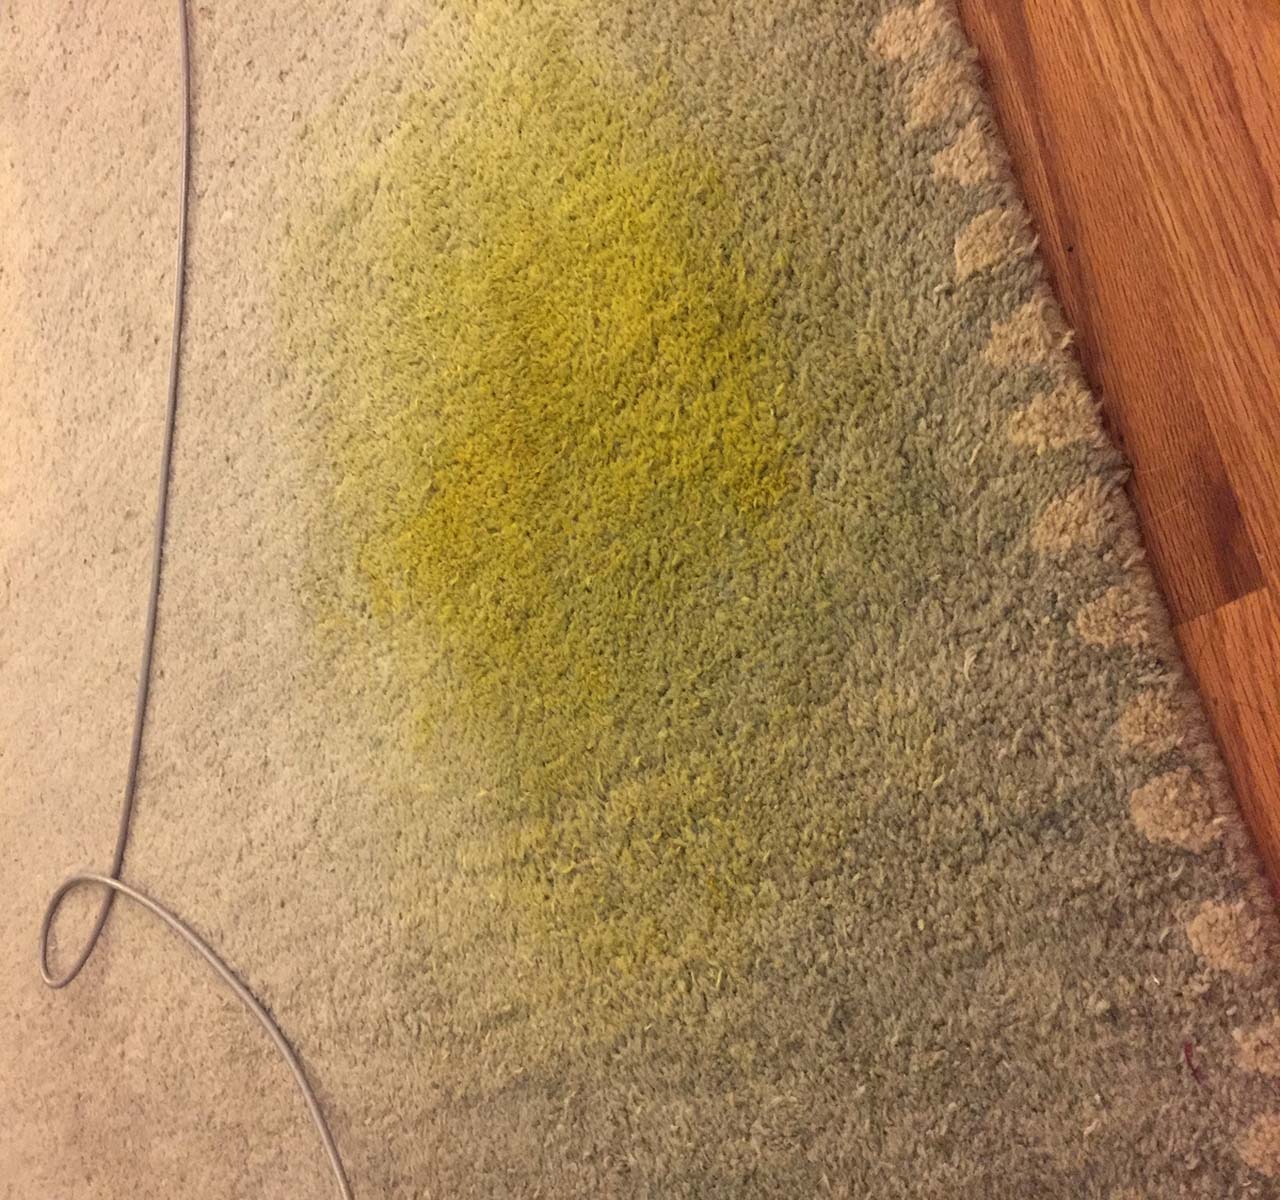 How To Get Turmeric Out Of A Carpet